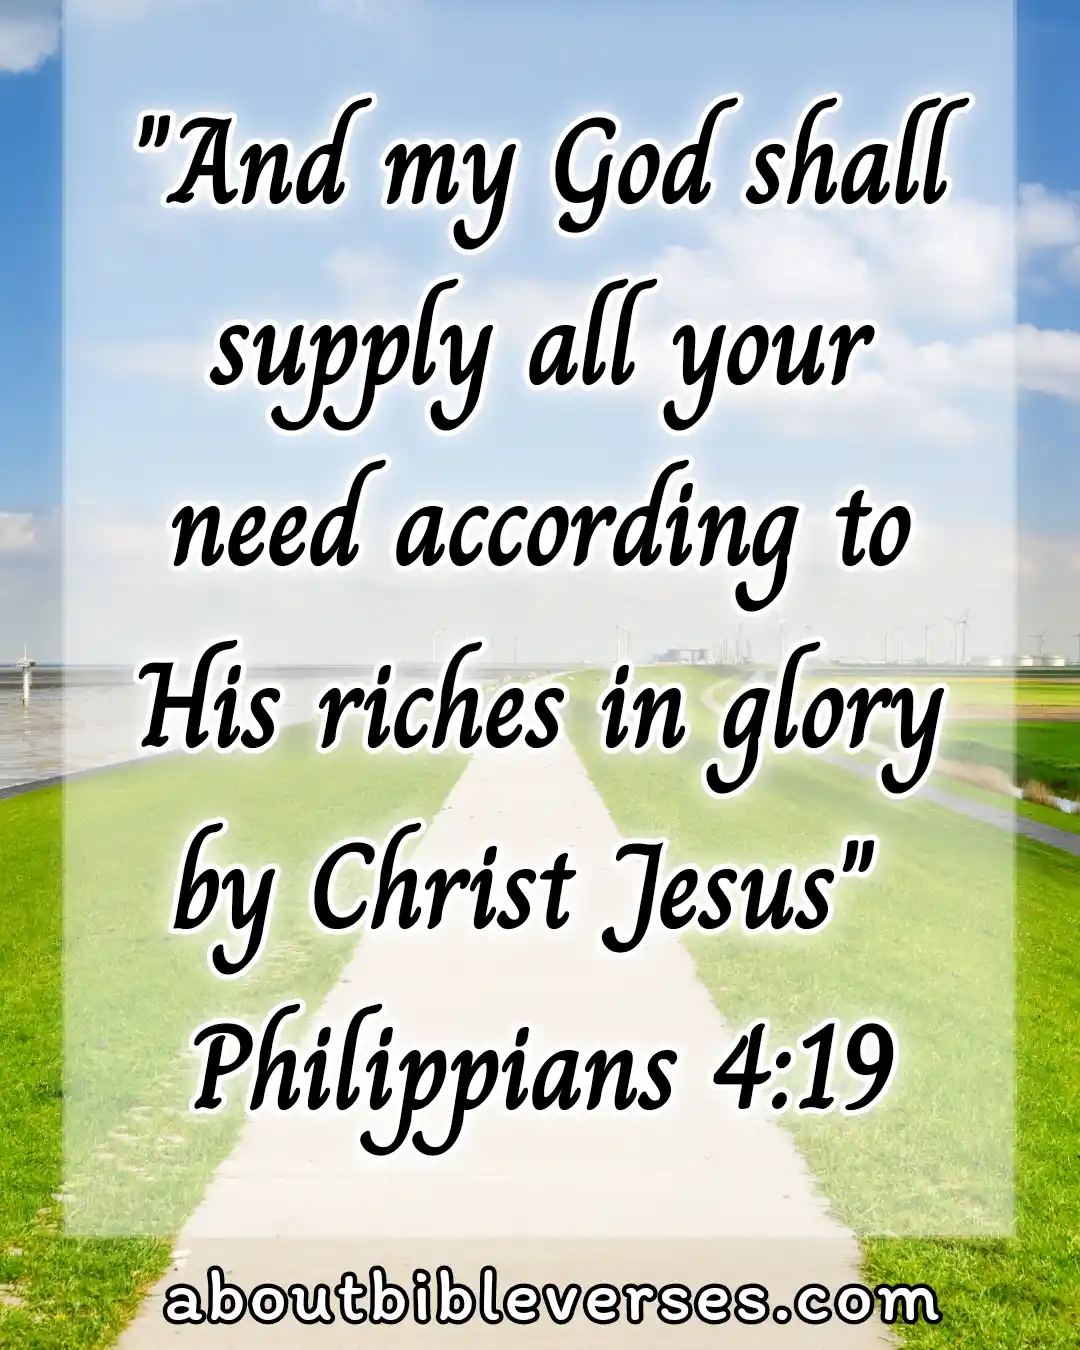 Happy Friday Blessings With Bible Verses (Philippians 4:19)